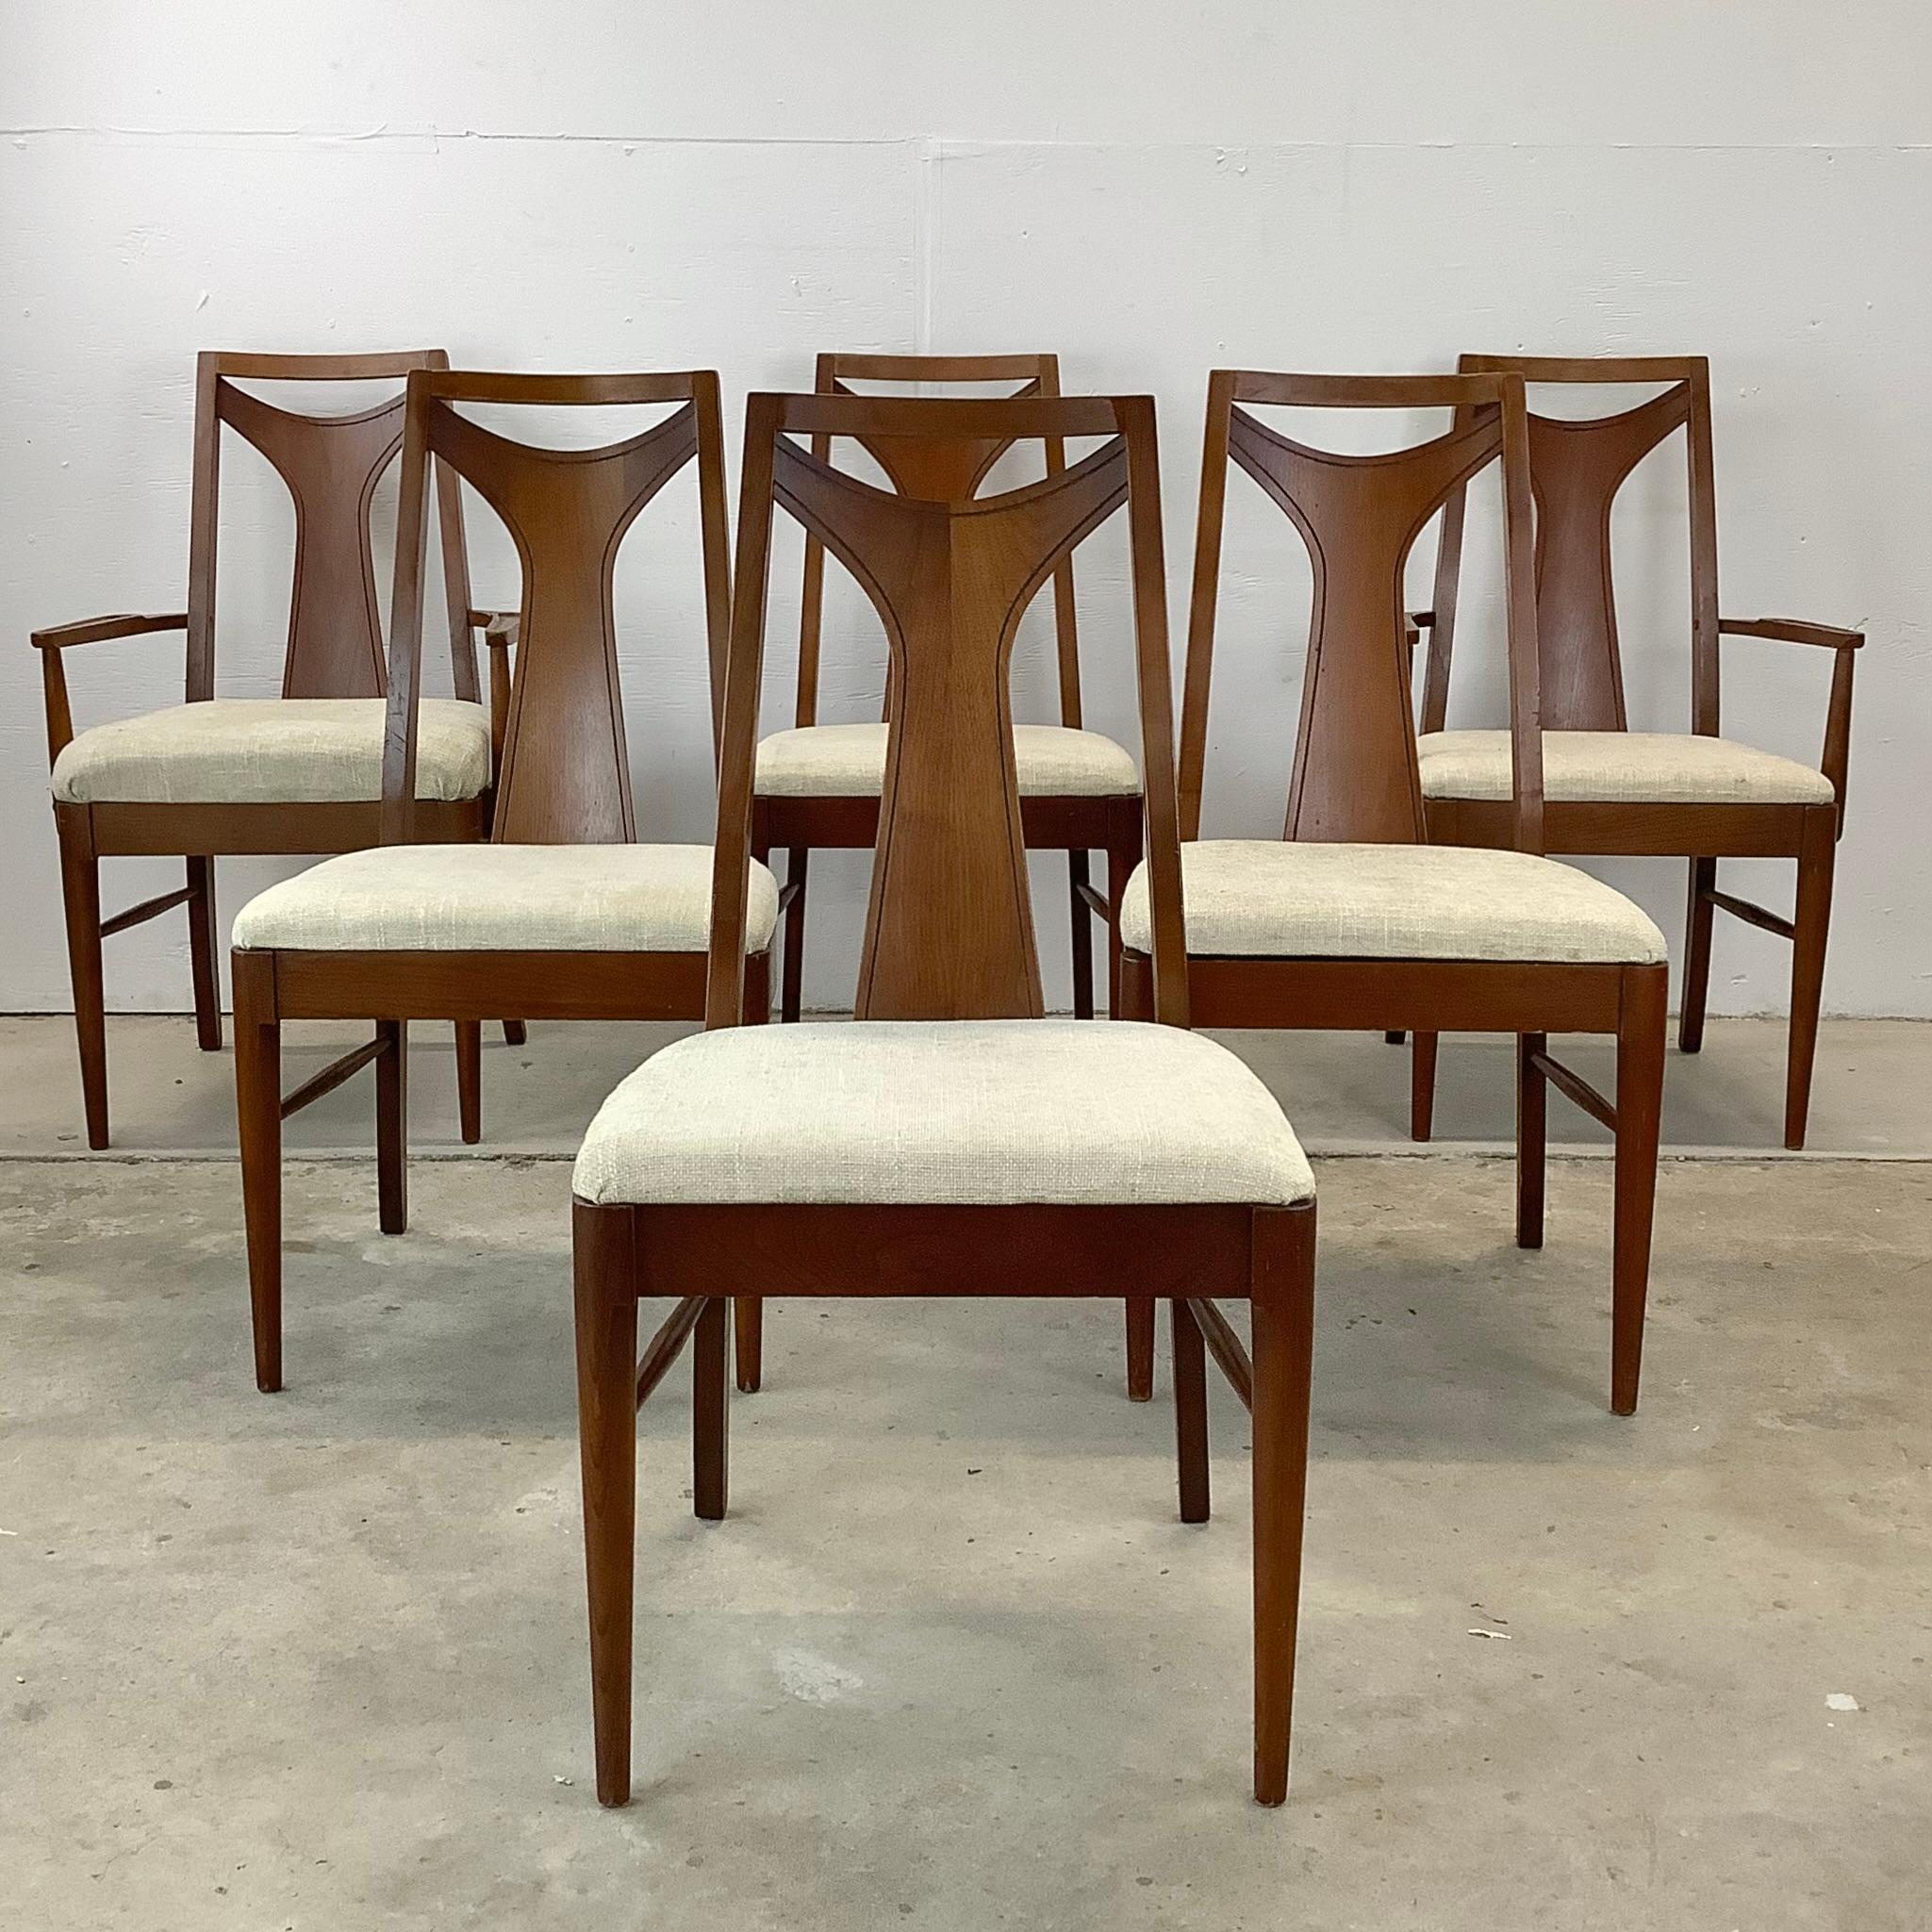 This striking mid-century set of six dining chairs beautifully combines comfort, style, and timeless elegance with vintage walnut finish and upholstery. This exquisite collection is a true testament to impressive mcm design and modern